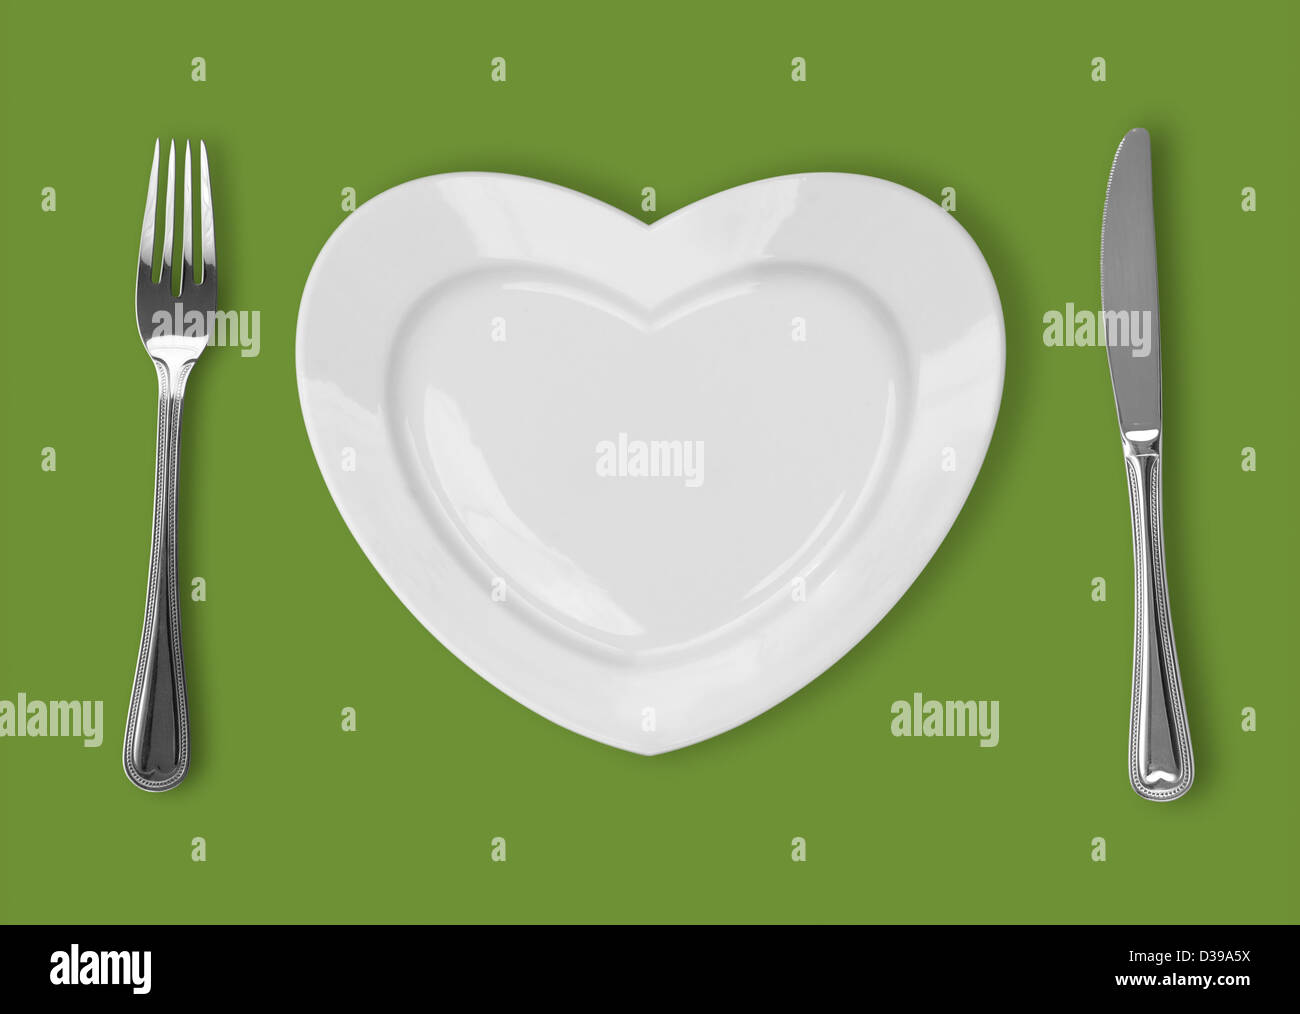 plate in shape of heart, table knife and fork on green background Stock Photo